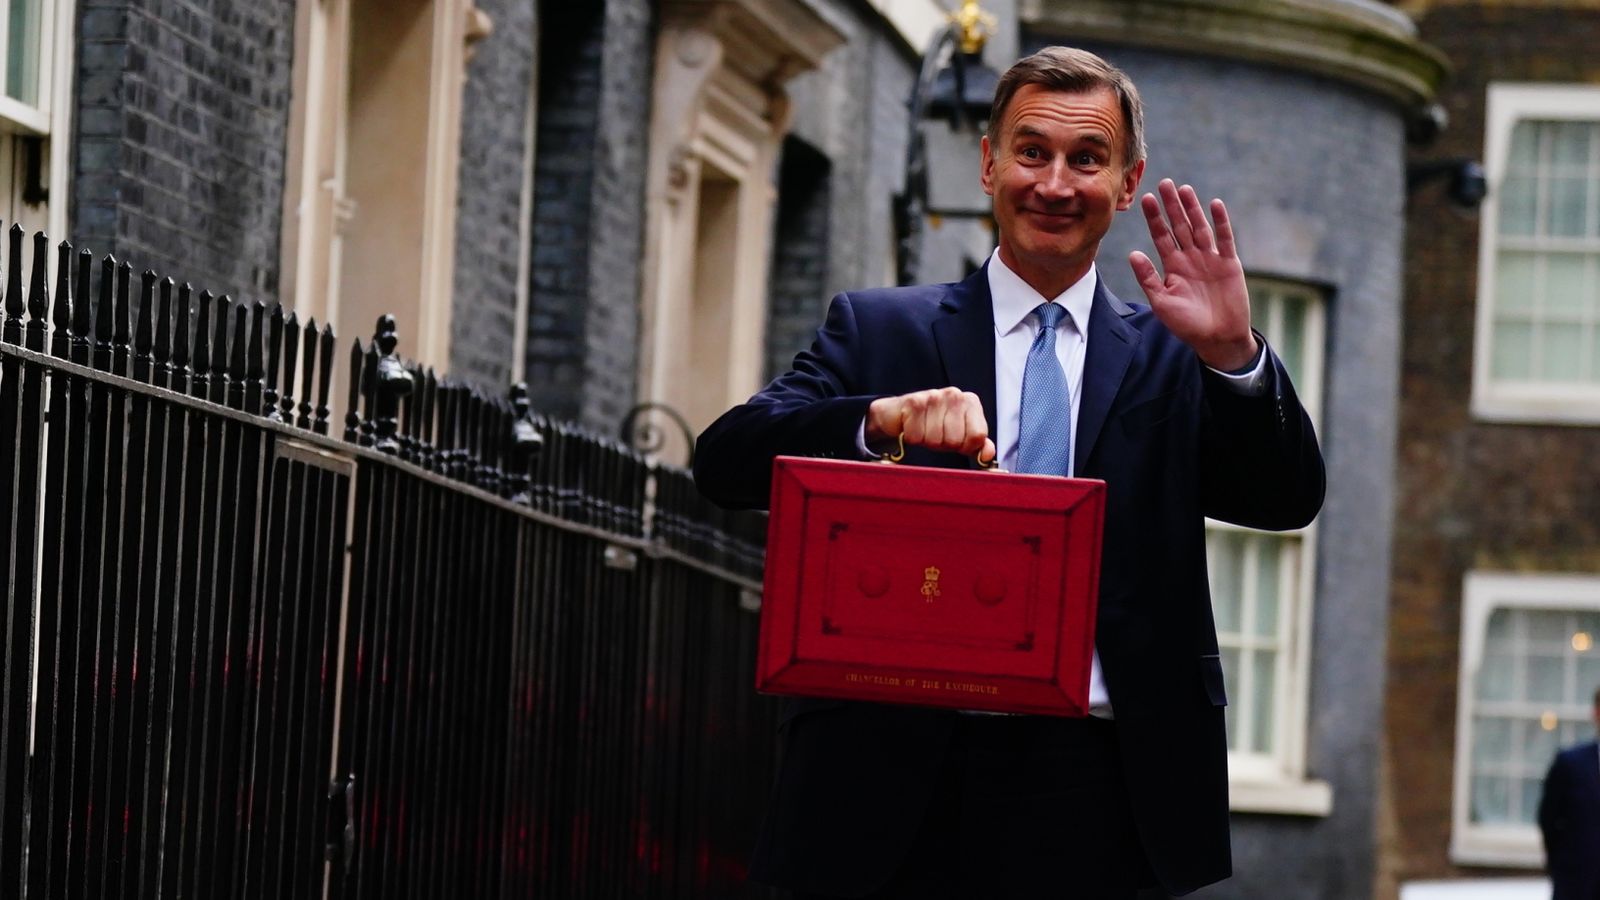 Budget 2023: Chancellor Jeremy Hunt's challenge is whether voters will feel the benefits fast enough